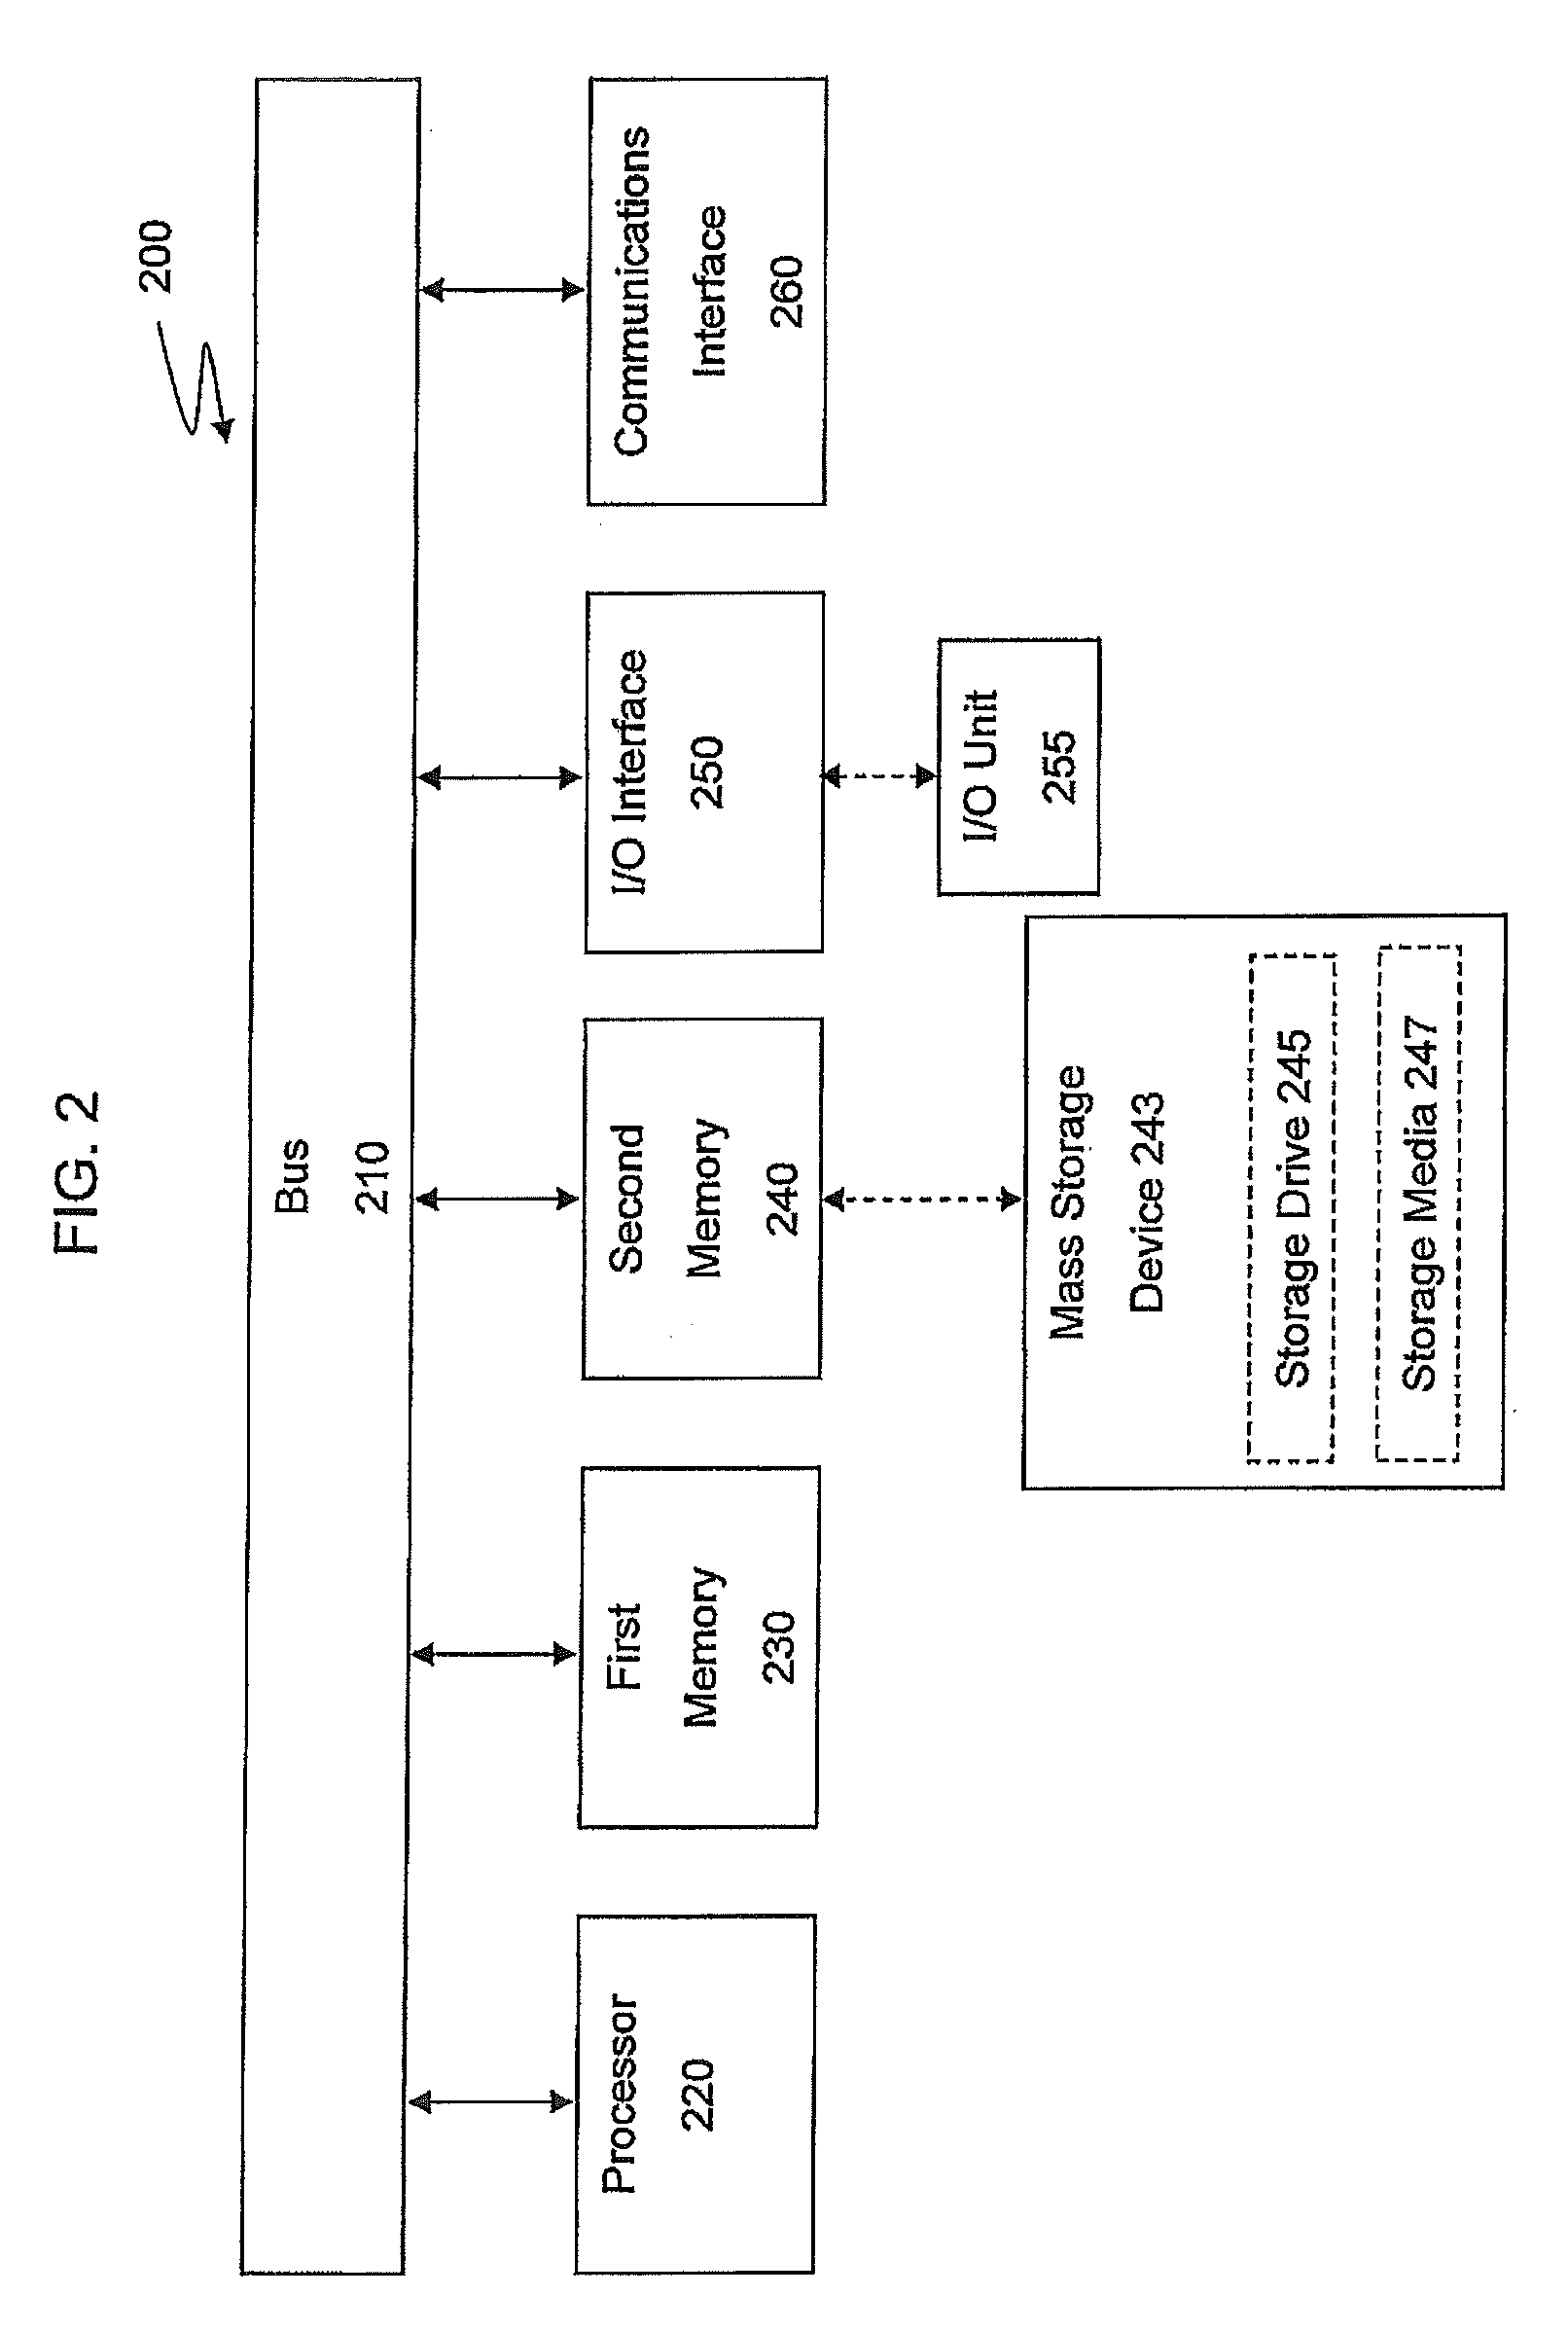 System and methods for discount retailing